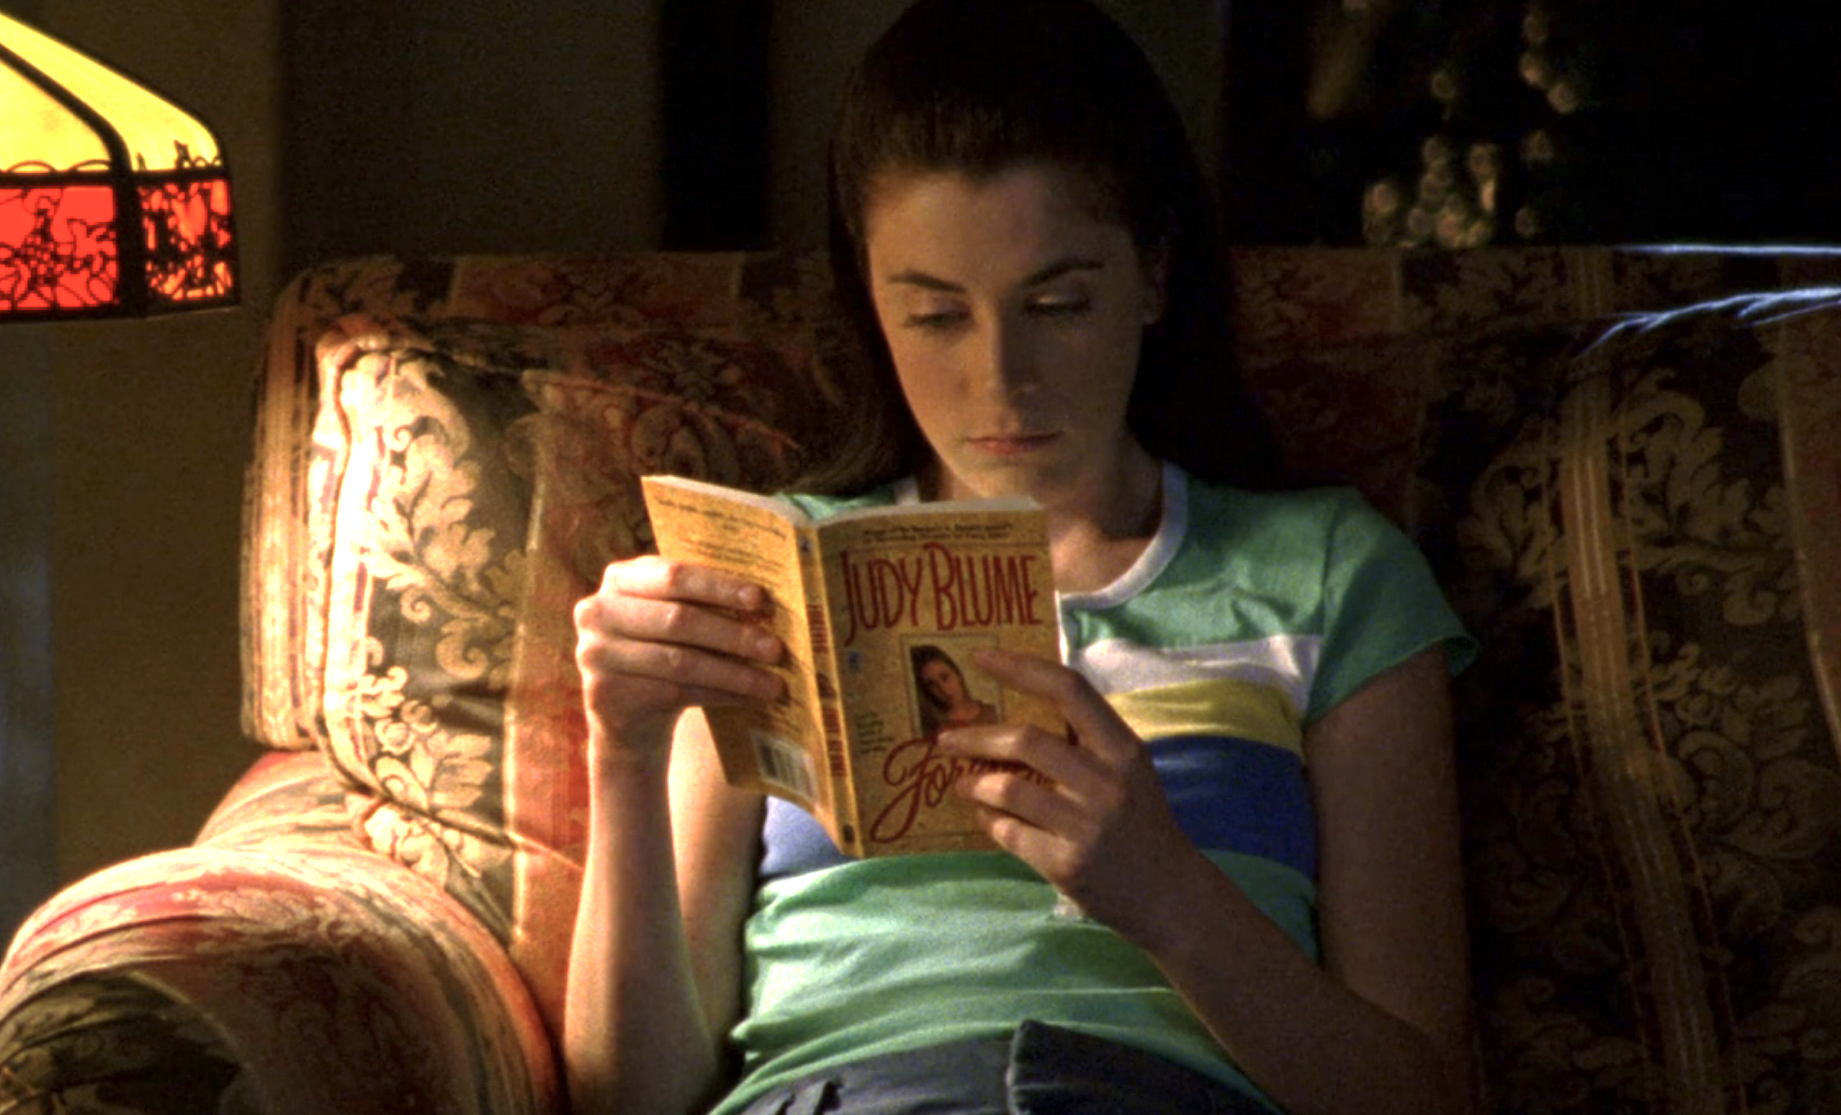 Screenshot from Veronica Mars S1E19. Mandy, young white woman with long brown hair and a green t-shirt, is on a couch reading by lamplight. The book is Forever by Judy Blume.